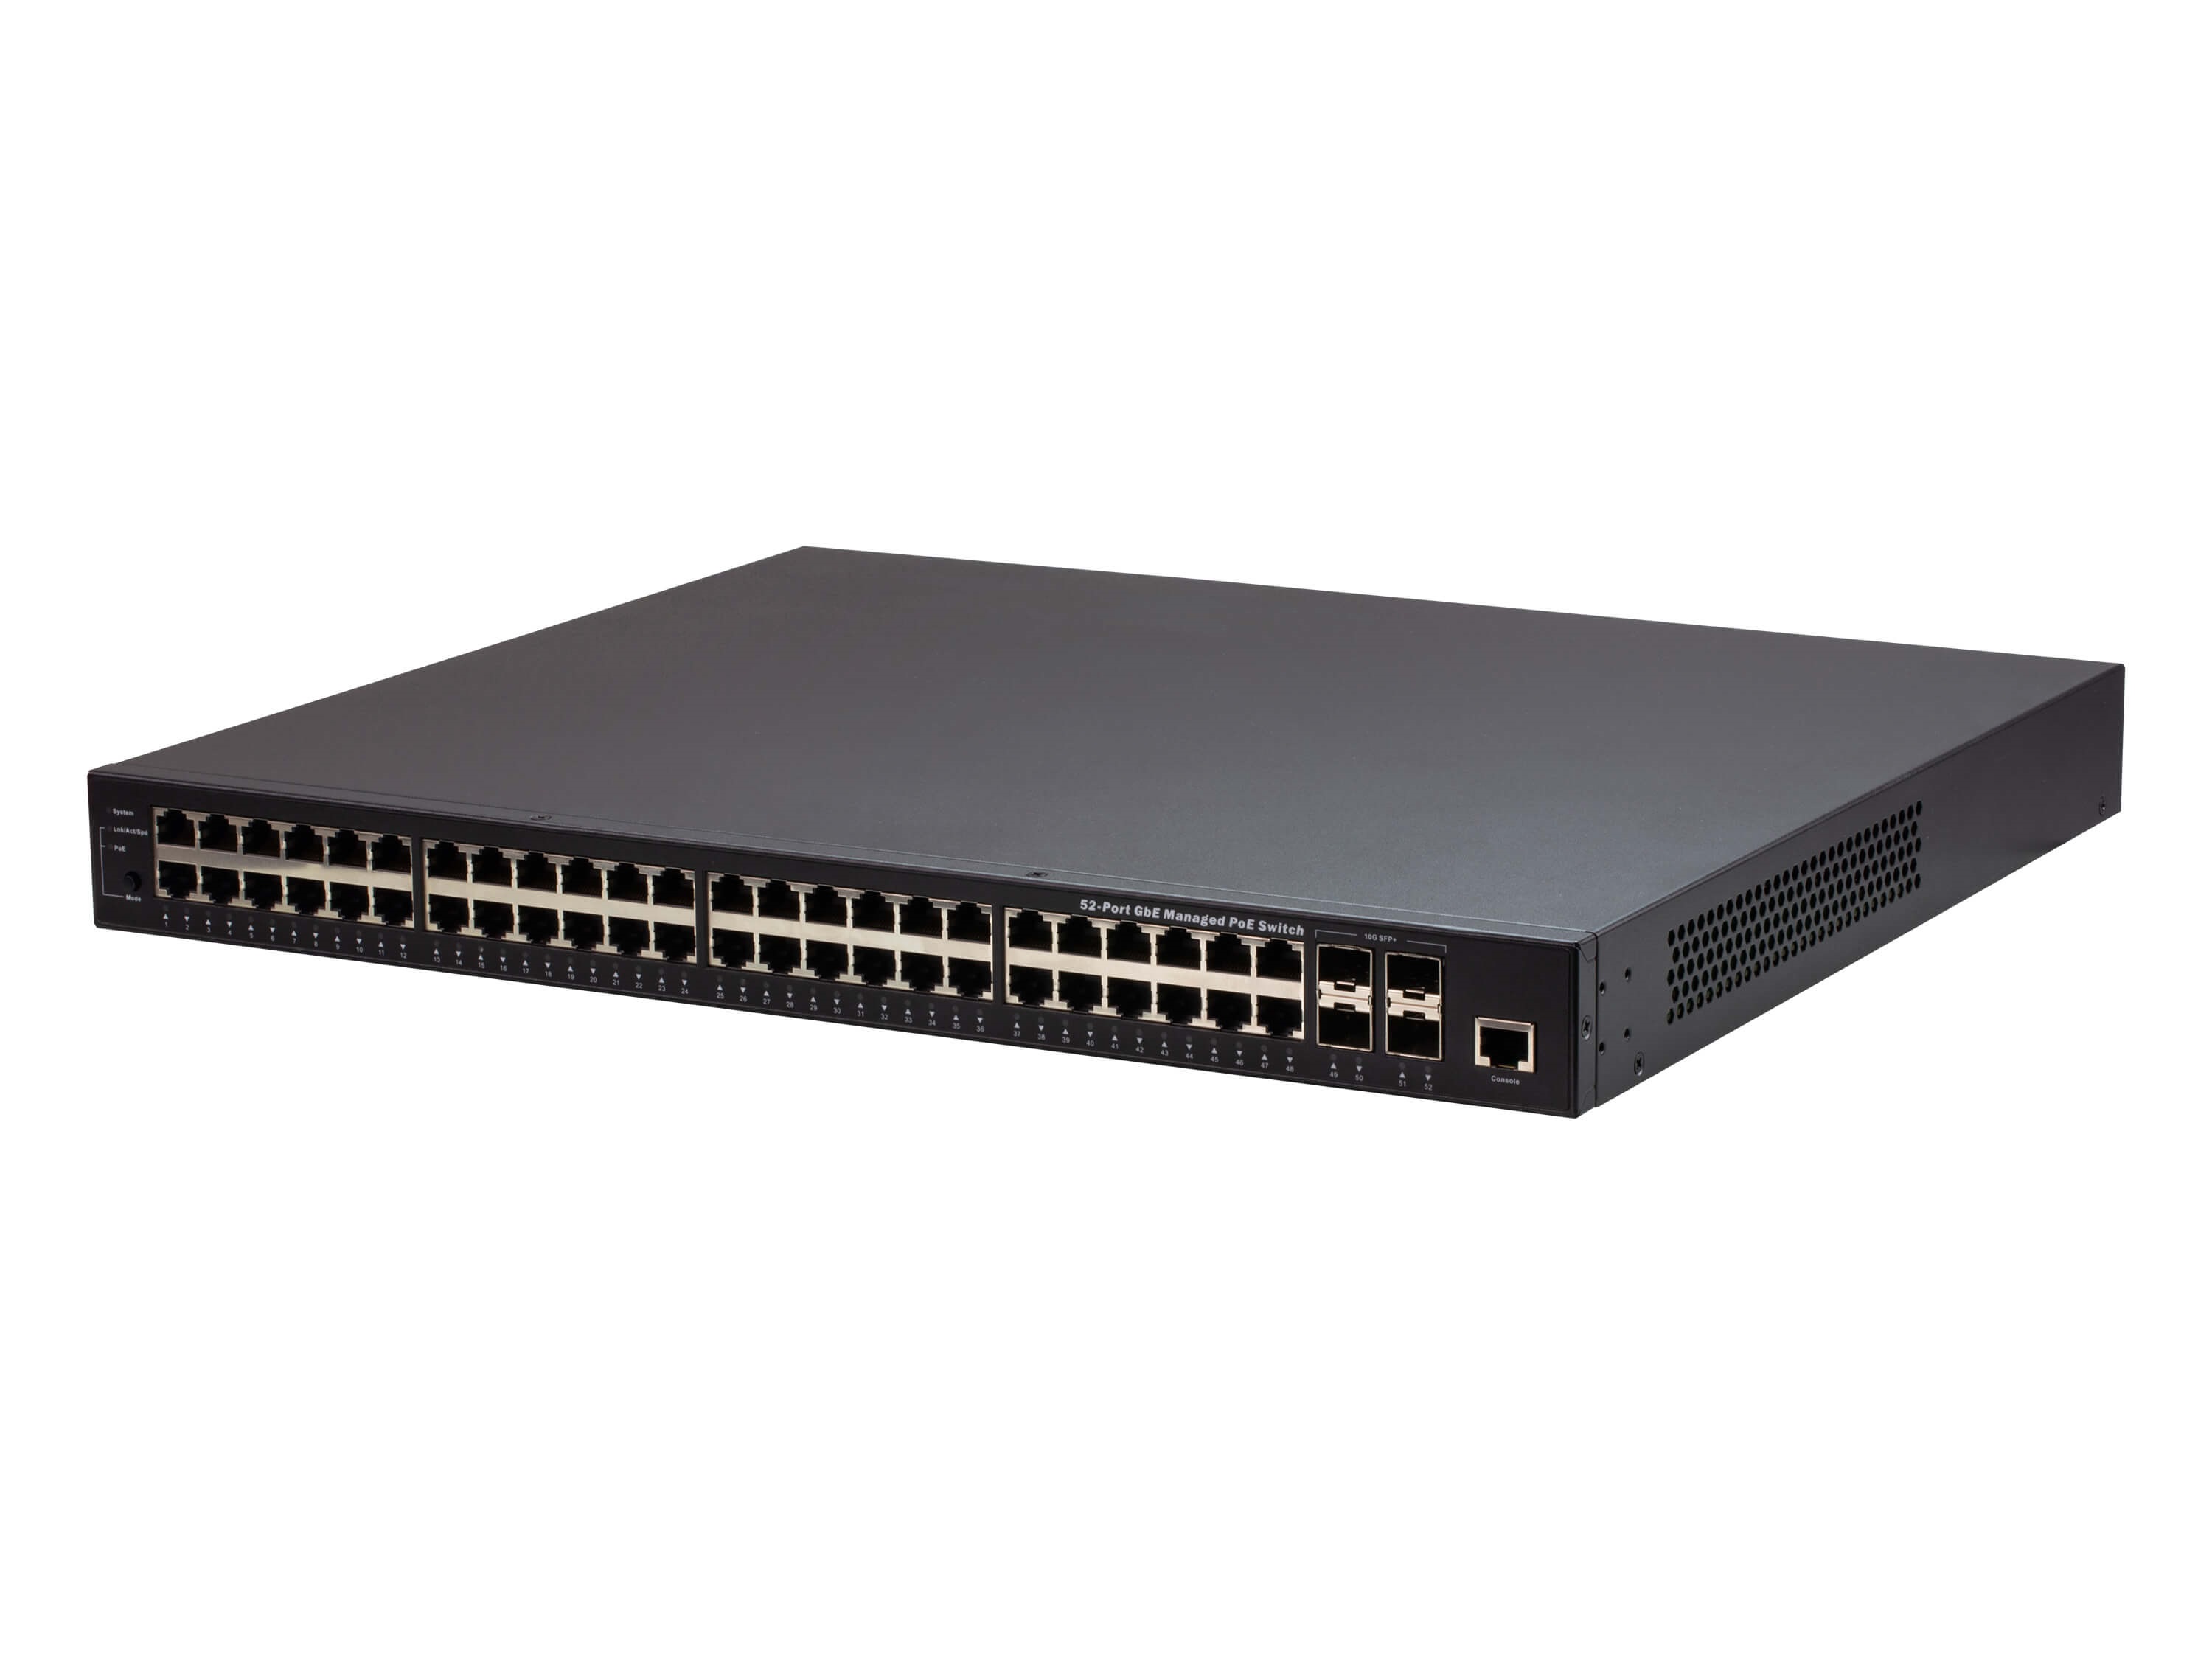 ES0152P 52-Port GbE PoE Managed Switch by Aten